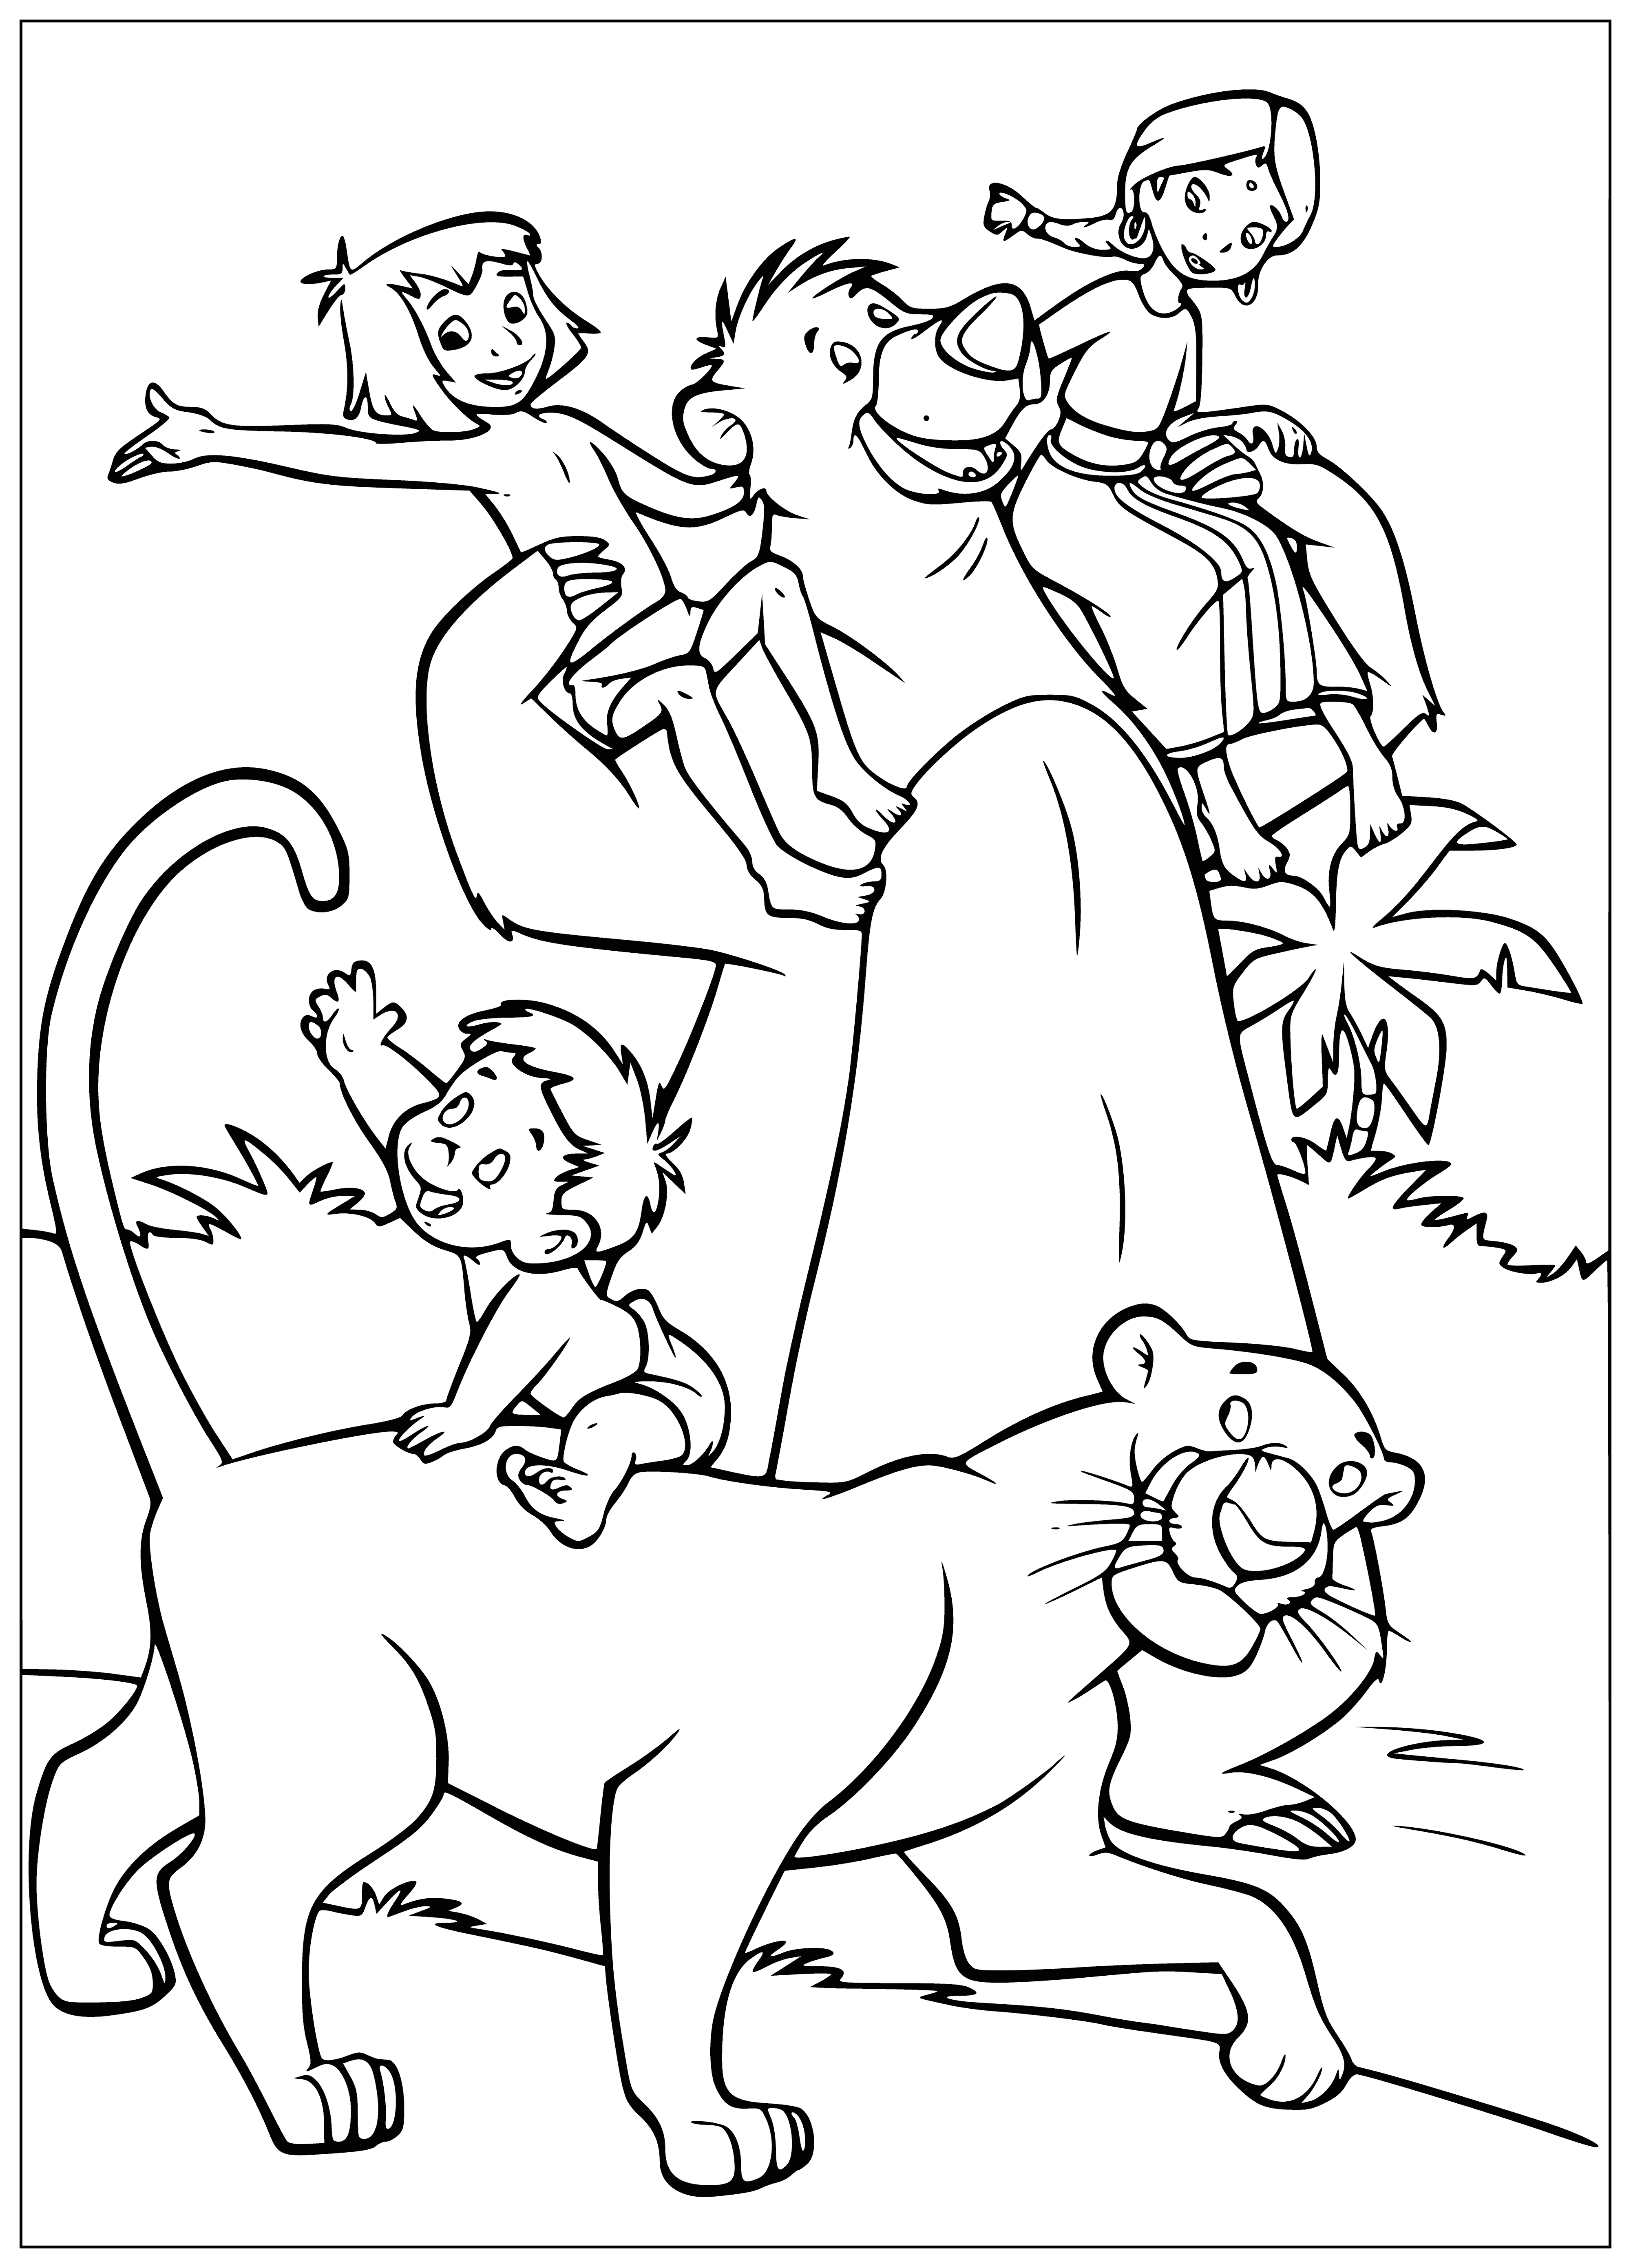 coloring page: Lion stands proud on branch, surrounded by a tiger, deer, monkey, and bird in a lush jungle landscape. Roaring triumphantly with claws extended.